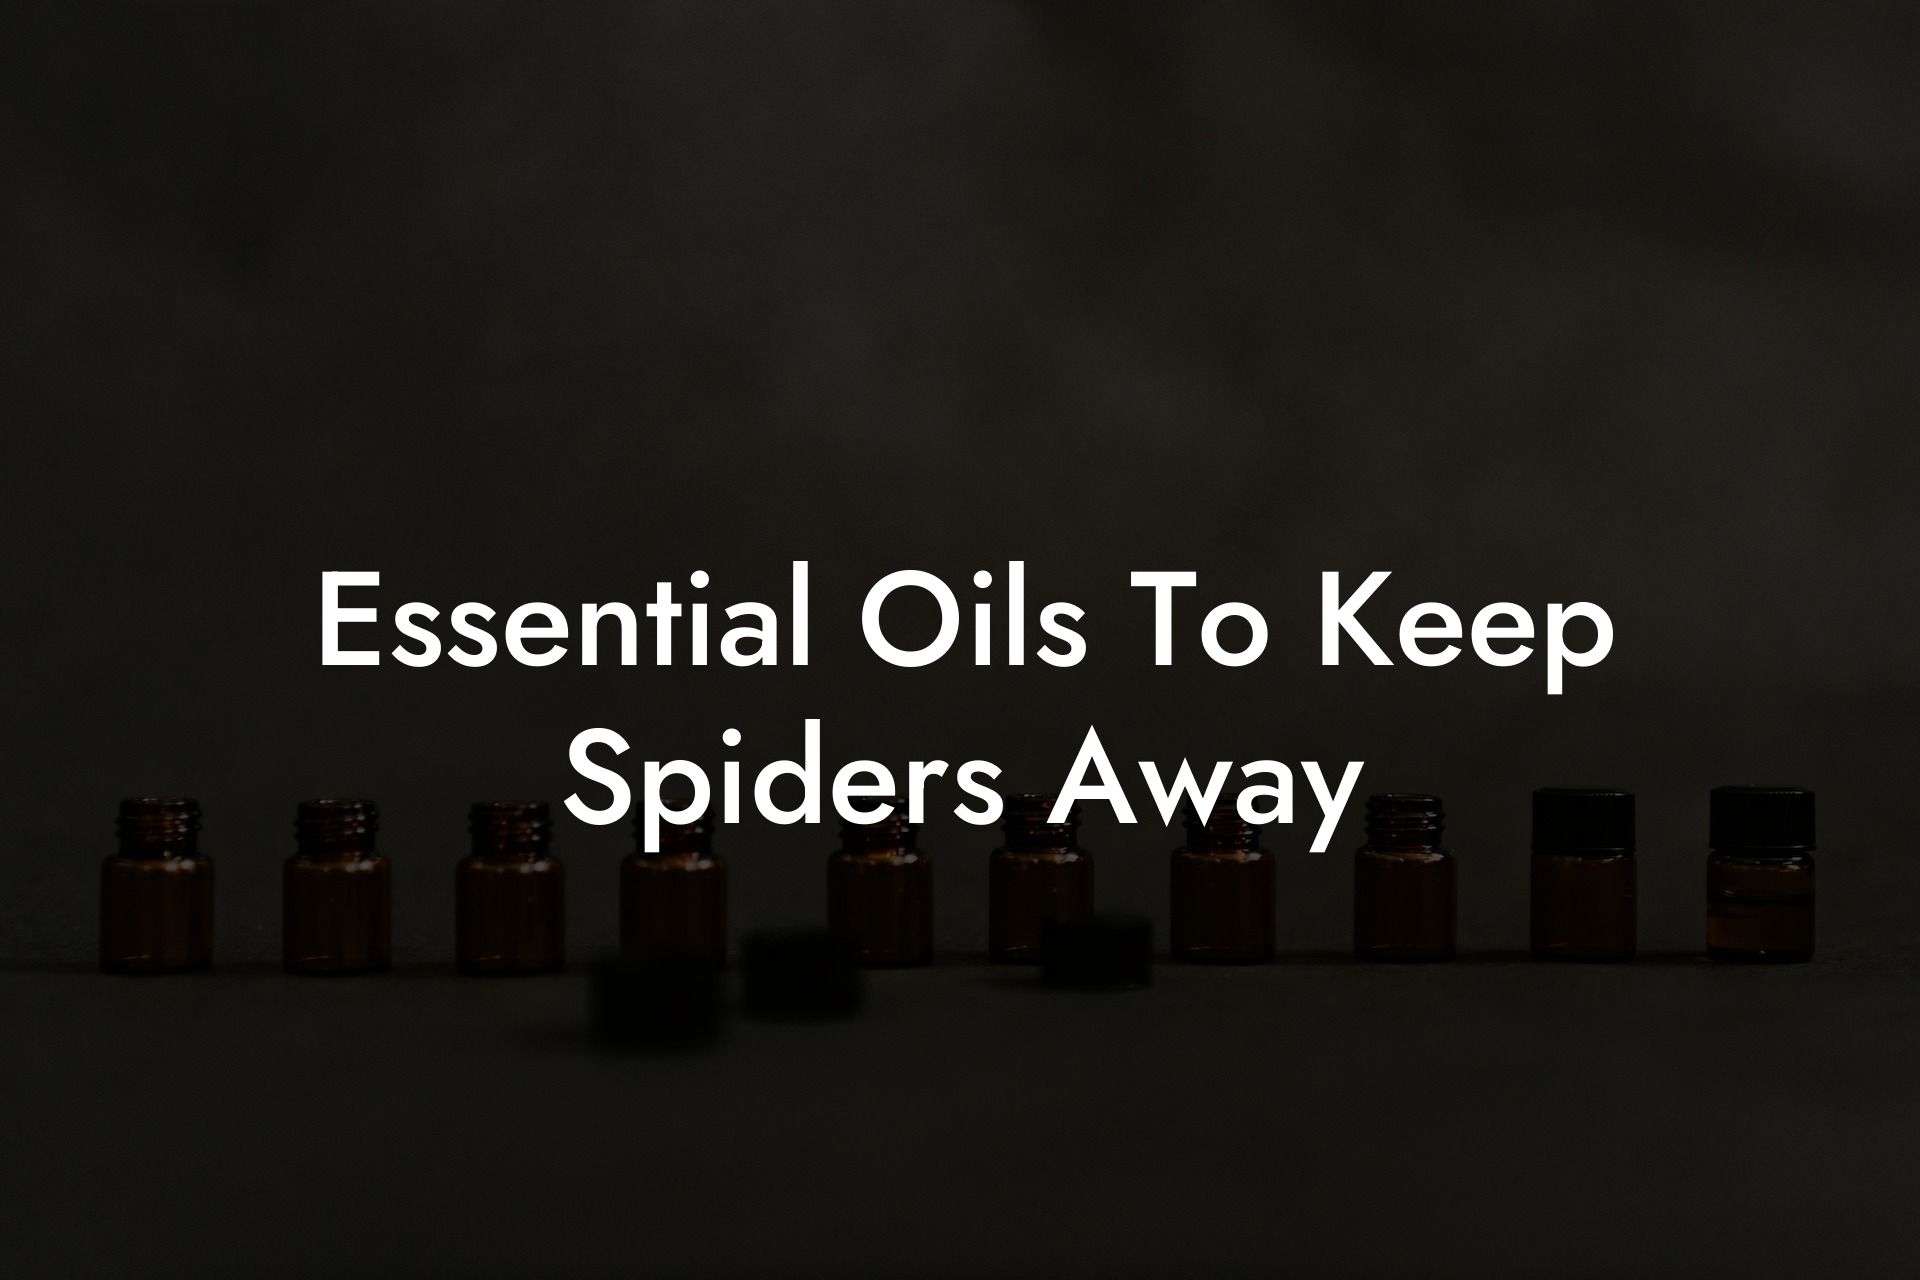 Essential Oils To Keep Spiders Away